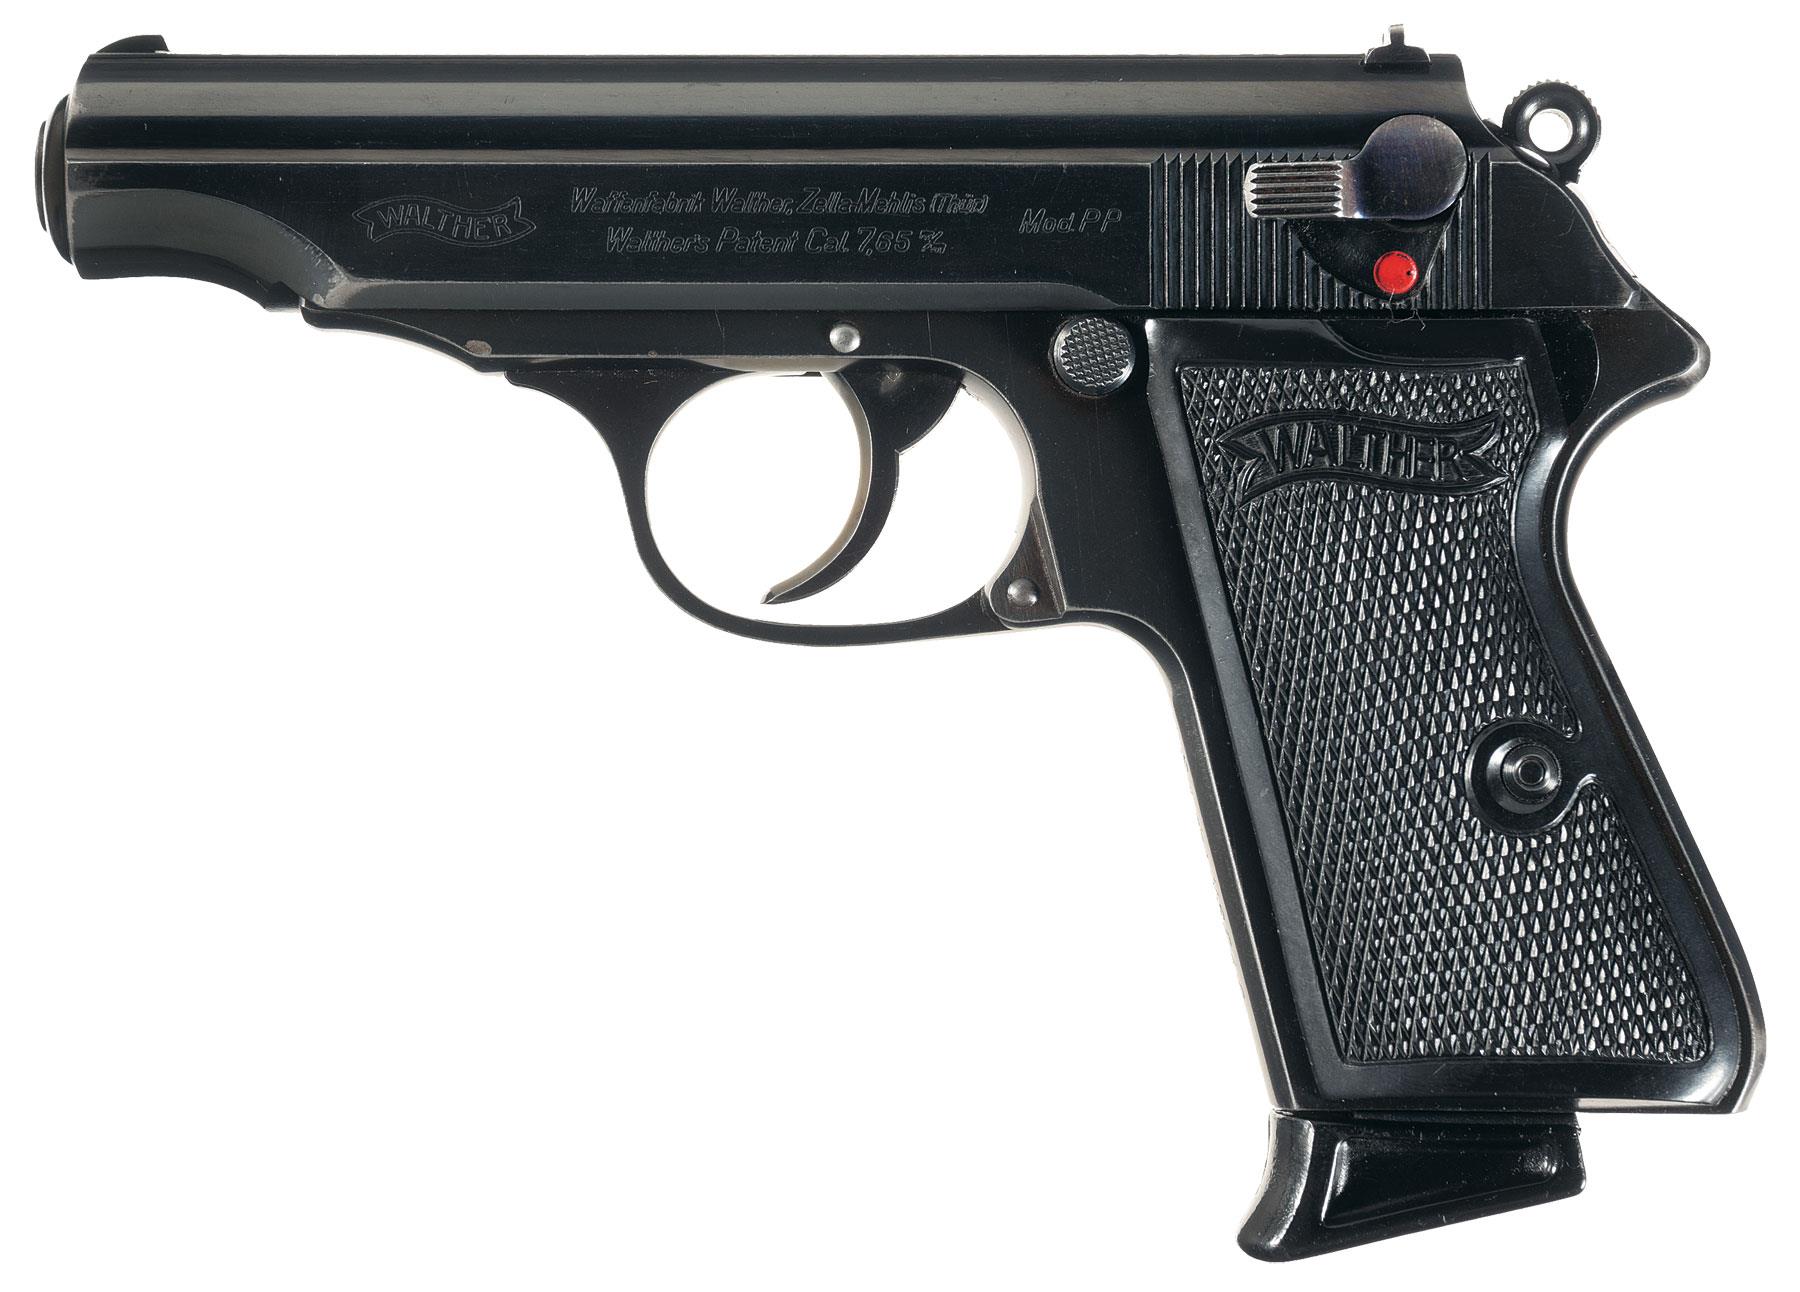 walther serial numbers ppq